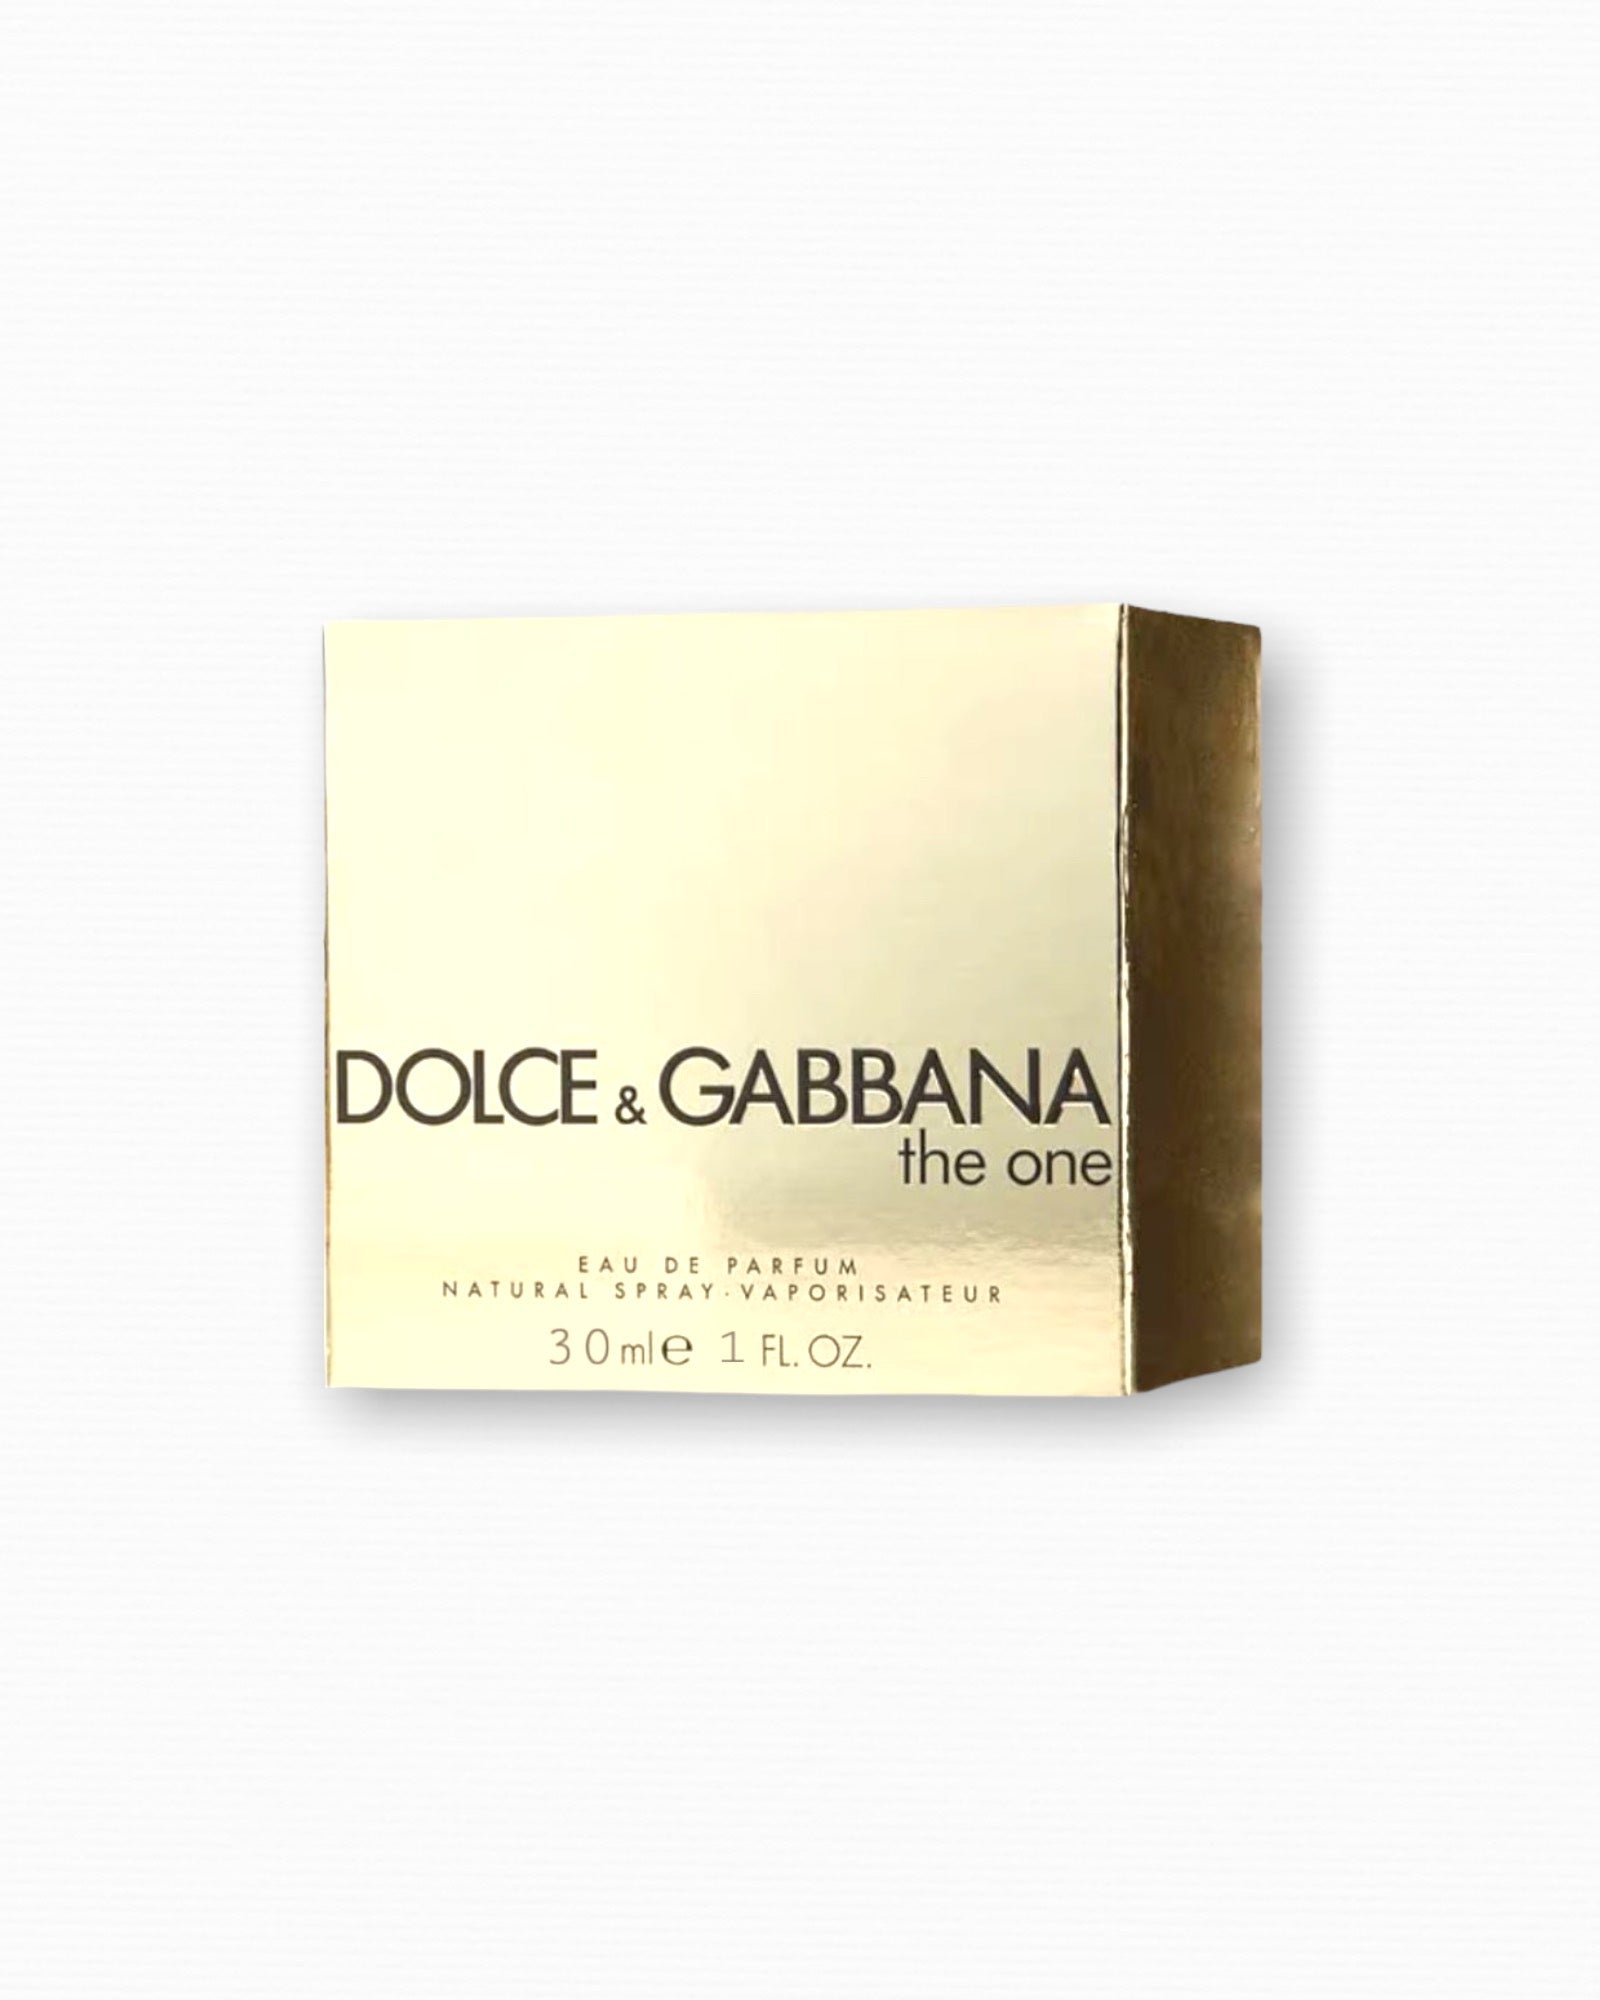 Dolce & Gabbana The One for Women